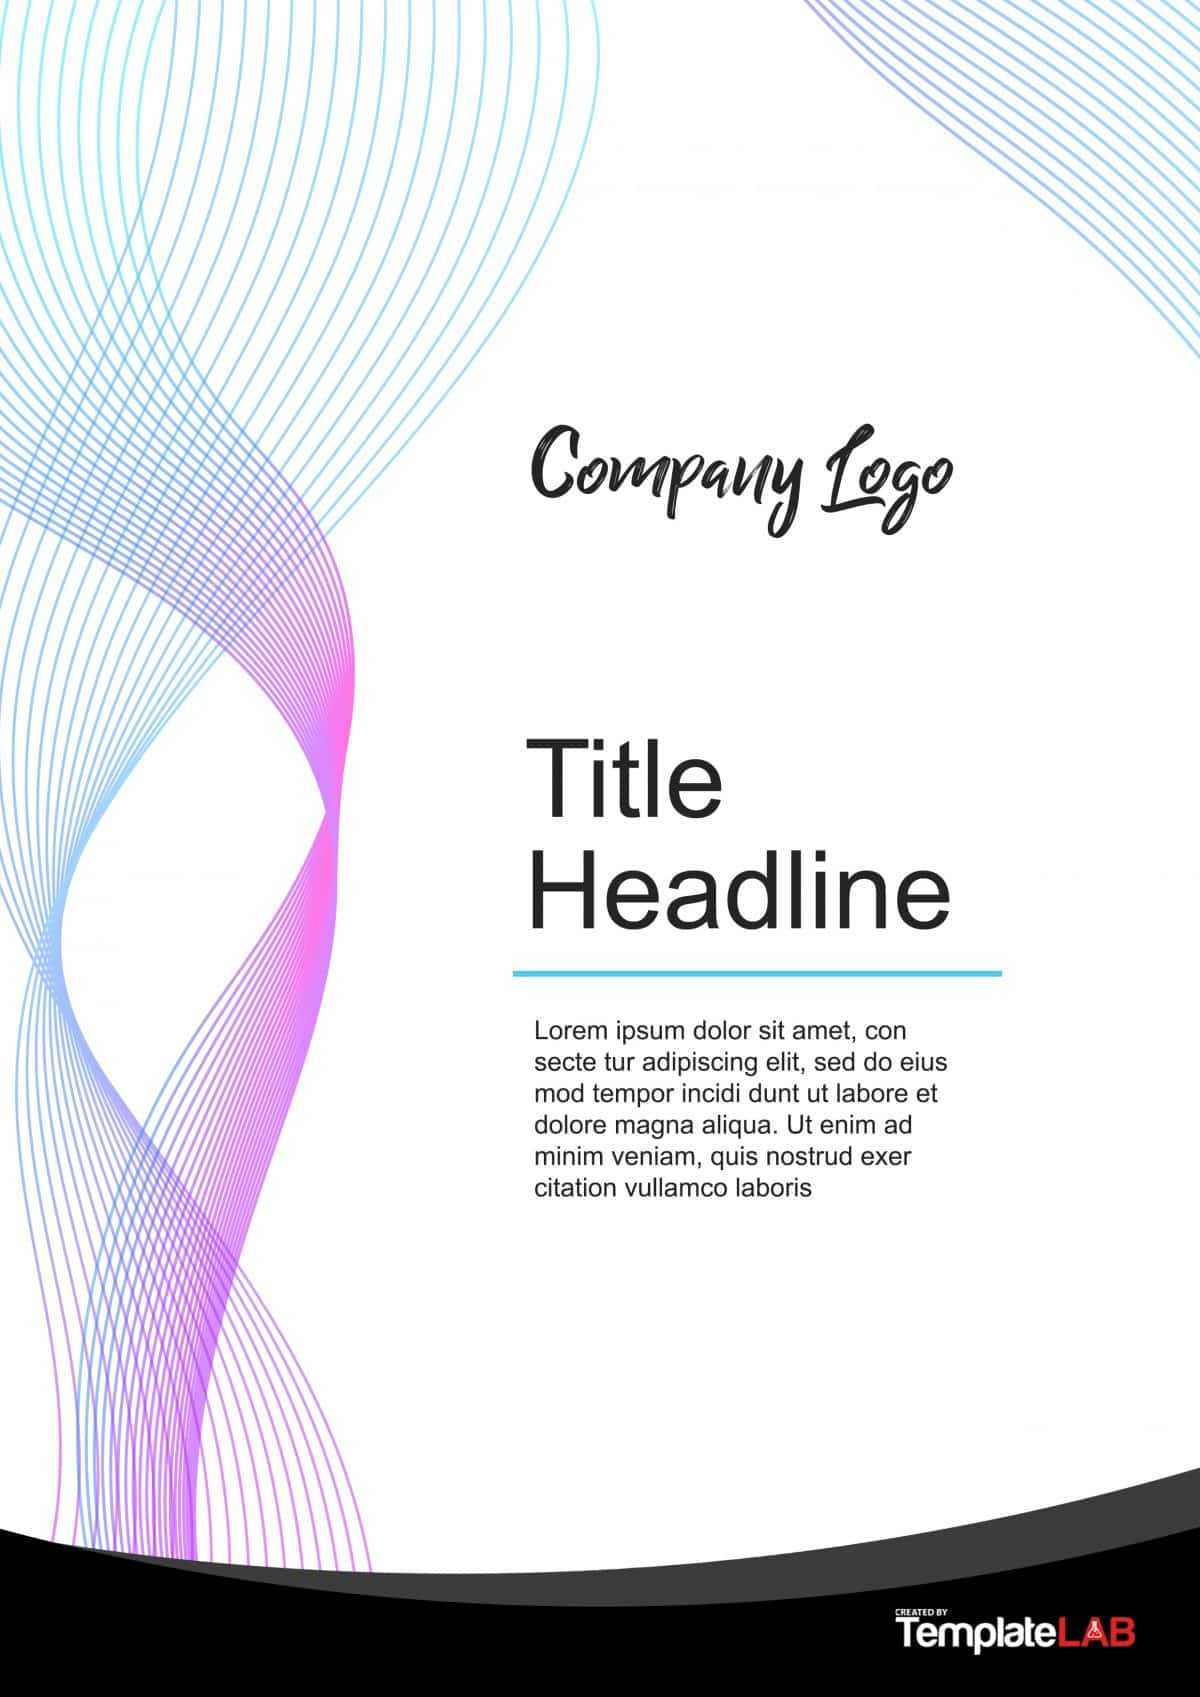 828329 Word Cover Page Templates | Wiring Resources 2019 Inside Cover Pages For Word Templates